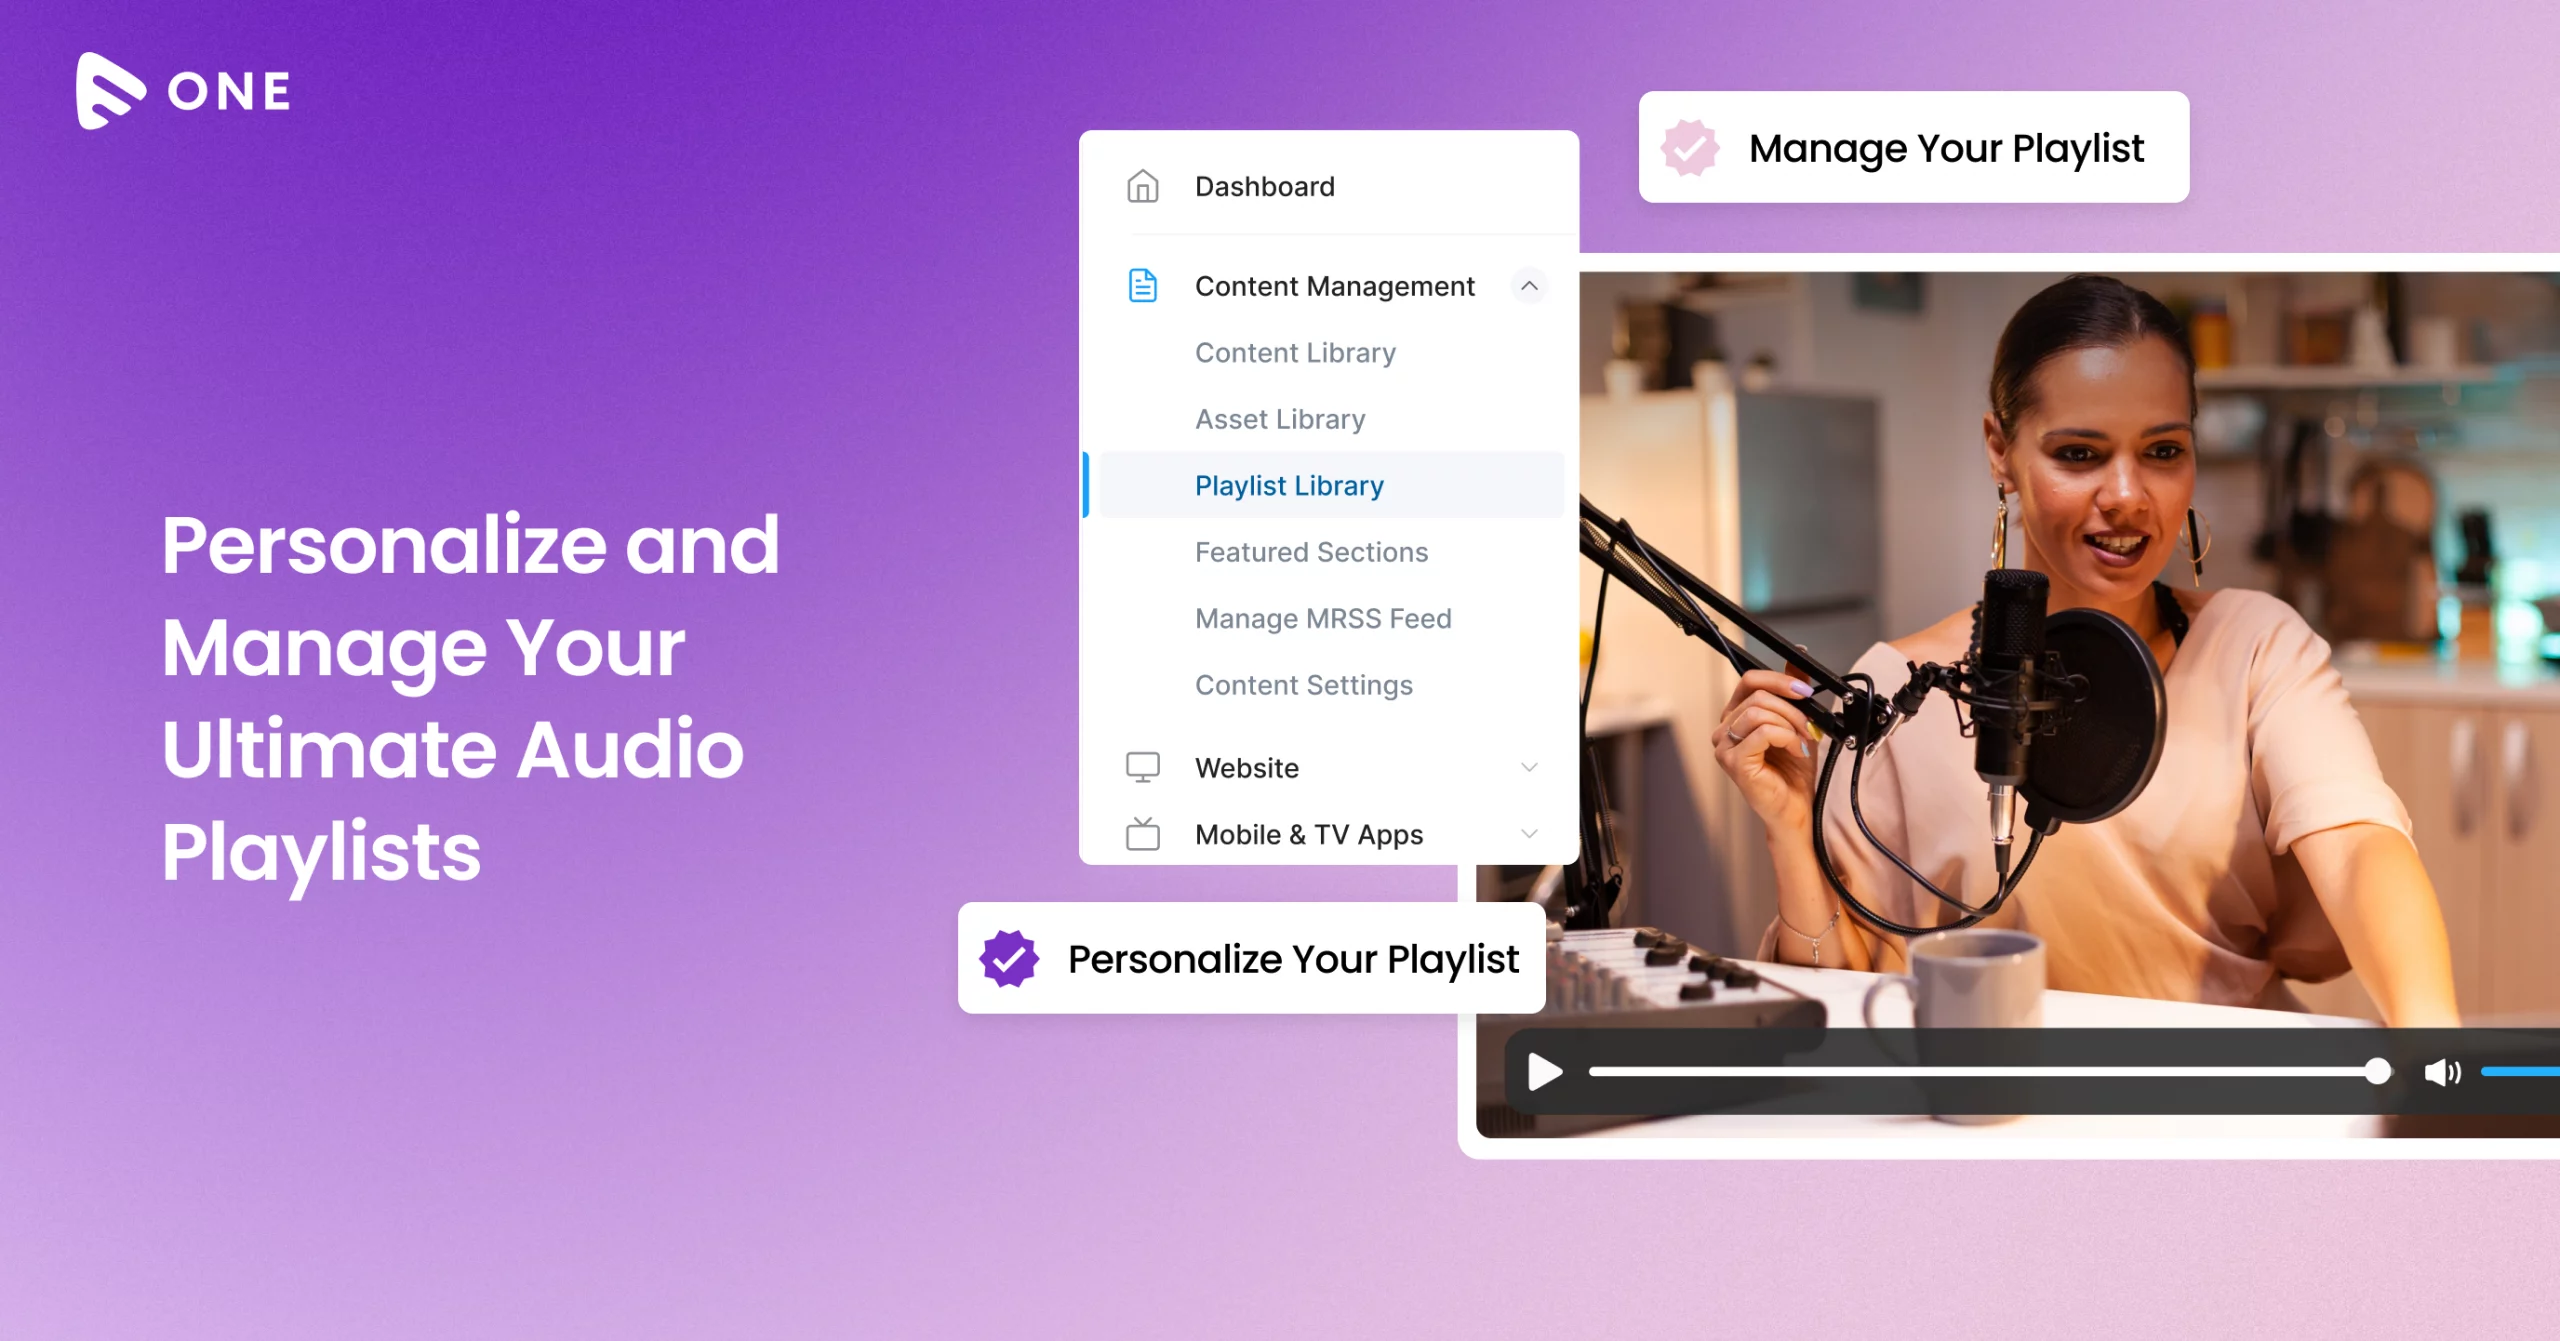 Personalize and Manage Your Ultimate Audio Playlists